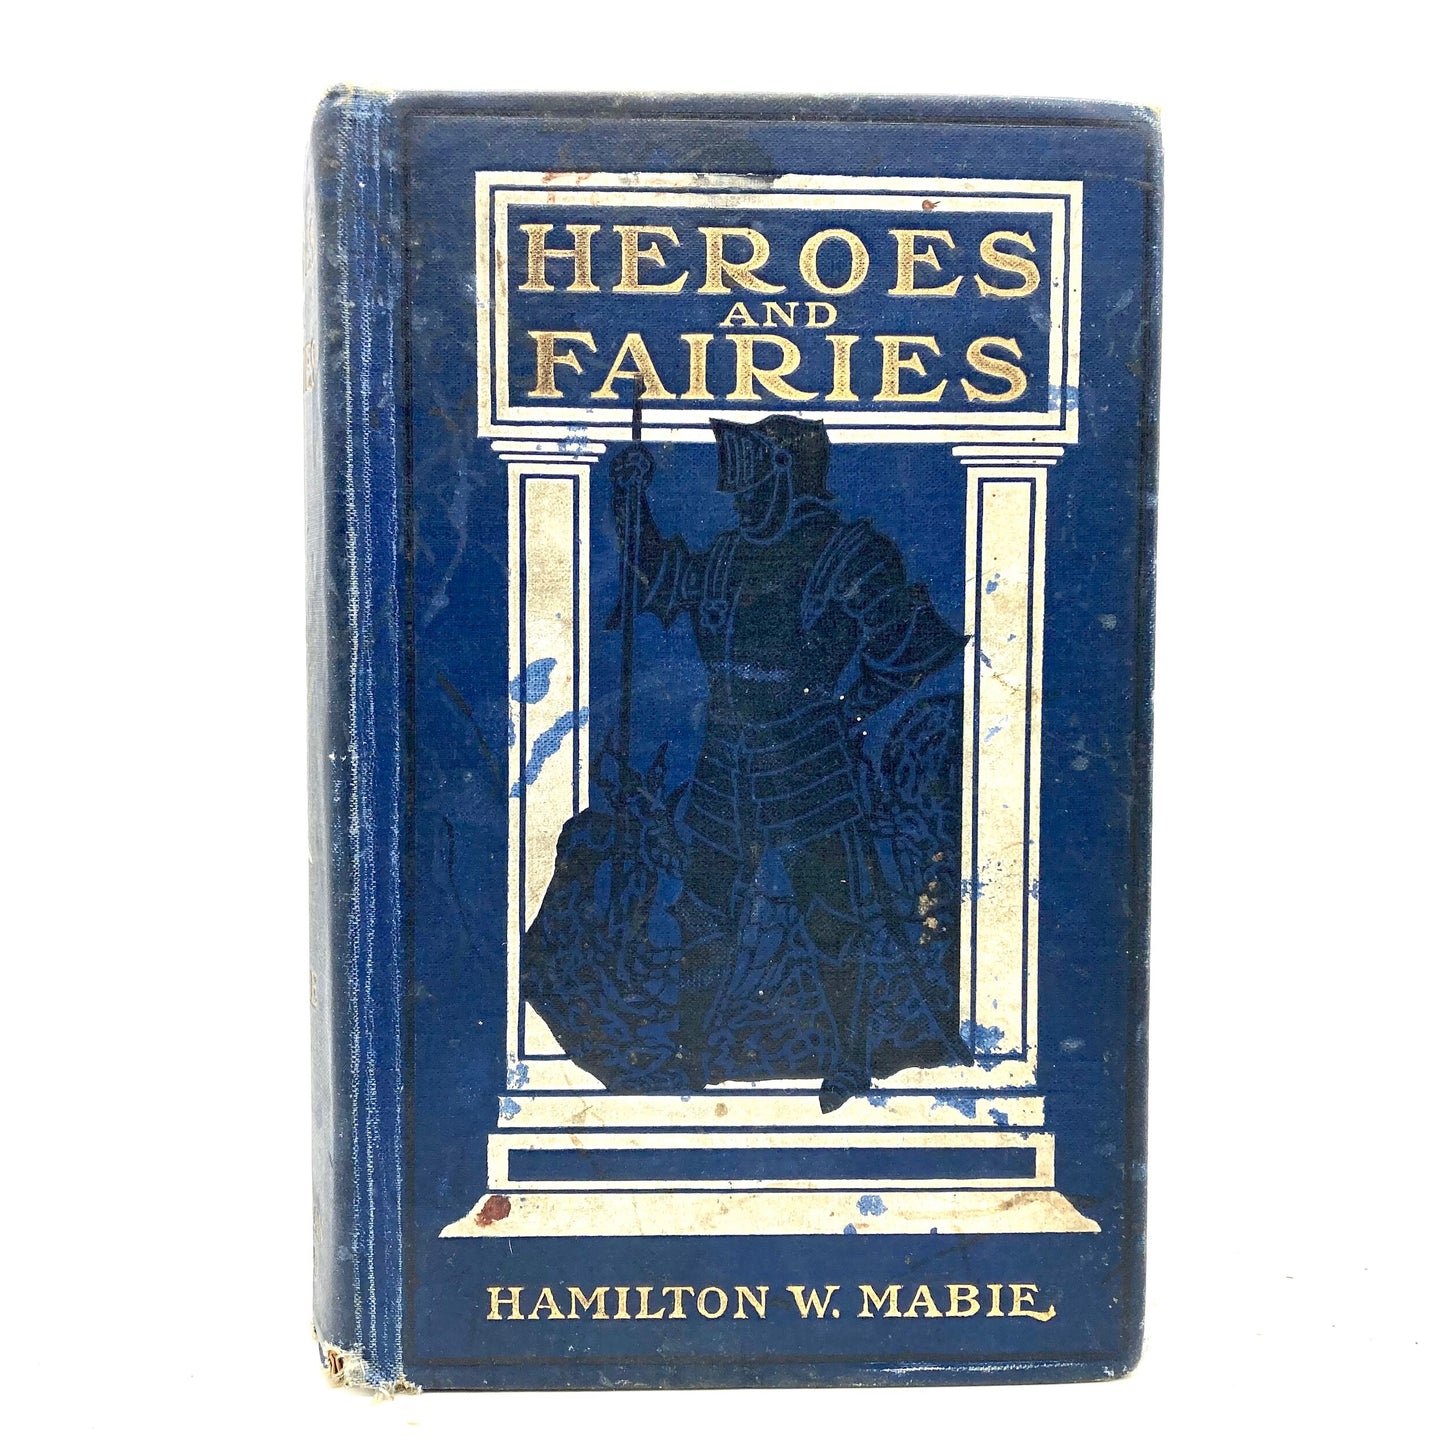 MABIE, Hamilton W. "Heroes and Fairies; Tales Every Child Should Know" [The Christian Herald, 1907] - Buzz Bookstore